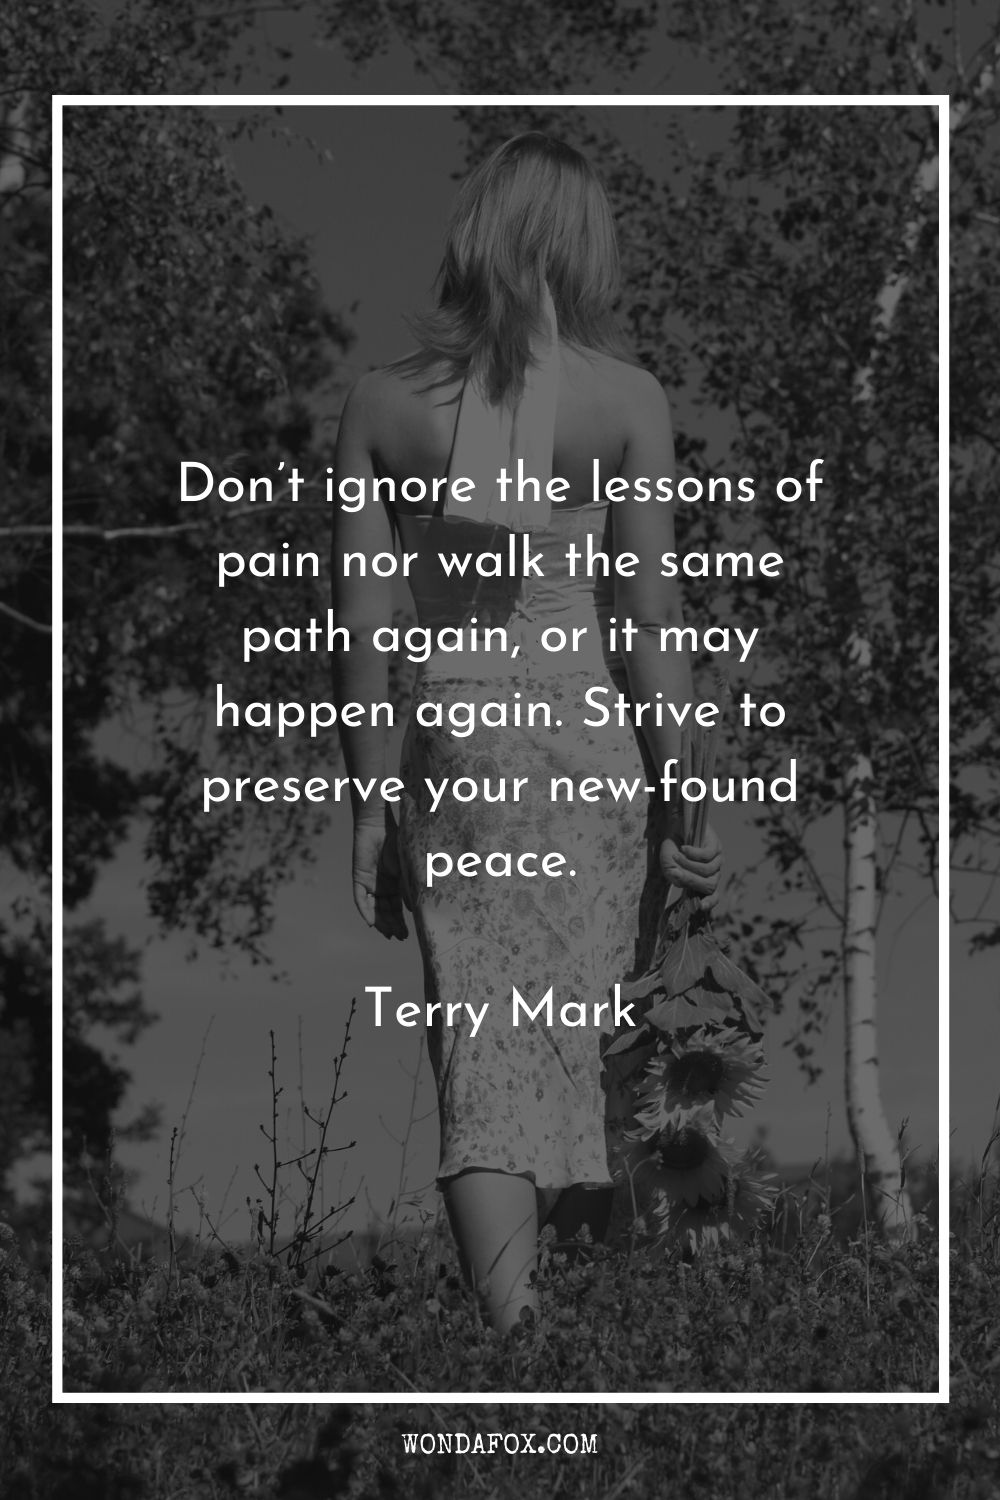 Don’t ignore the lessons of pain nor walk the same path again, or it may happen again. Strive to preserve your new-found peace.